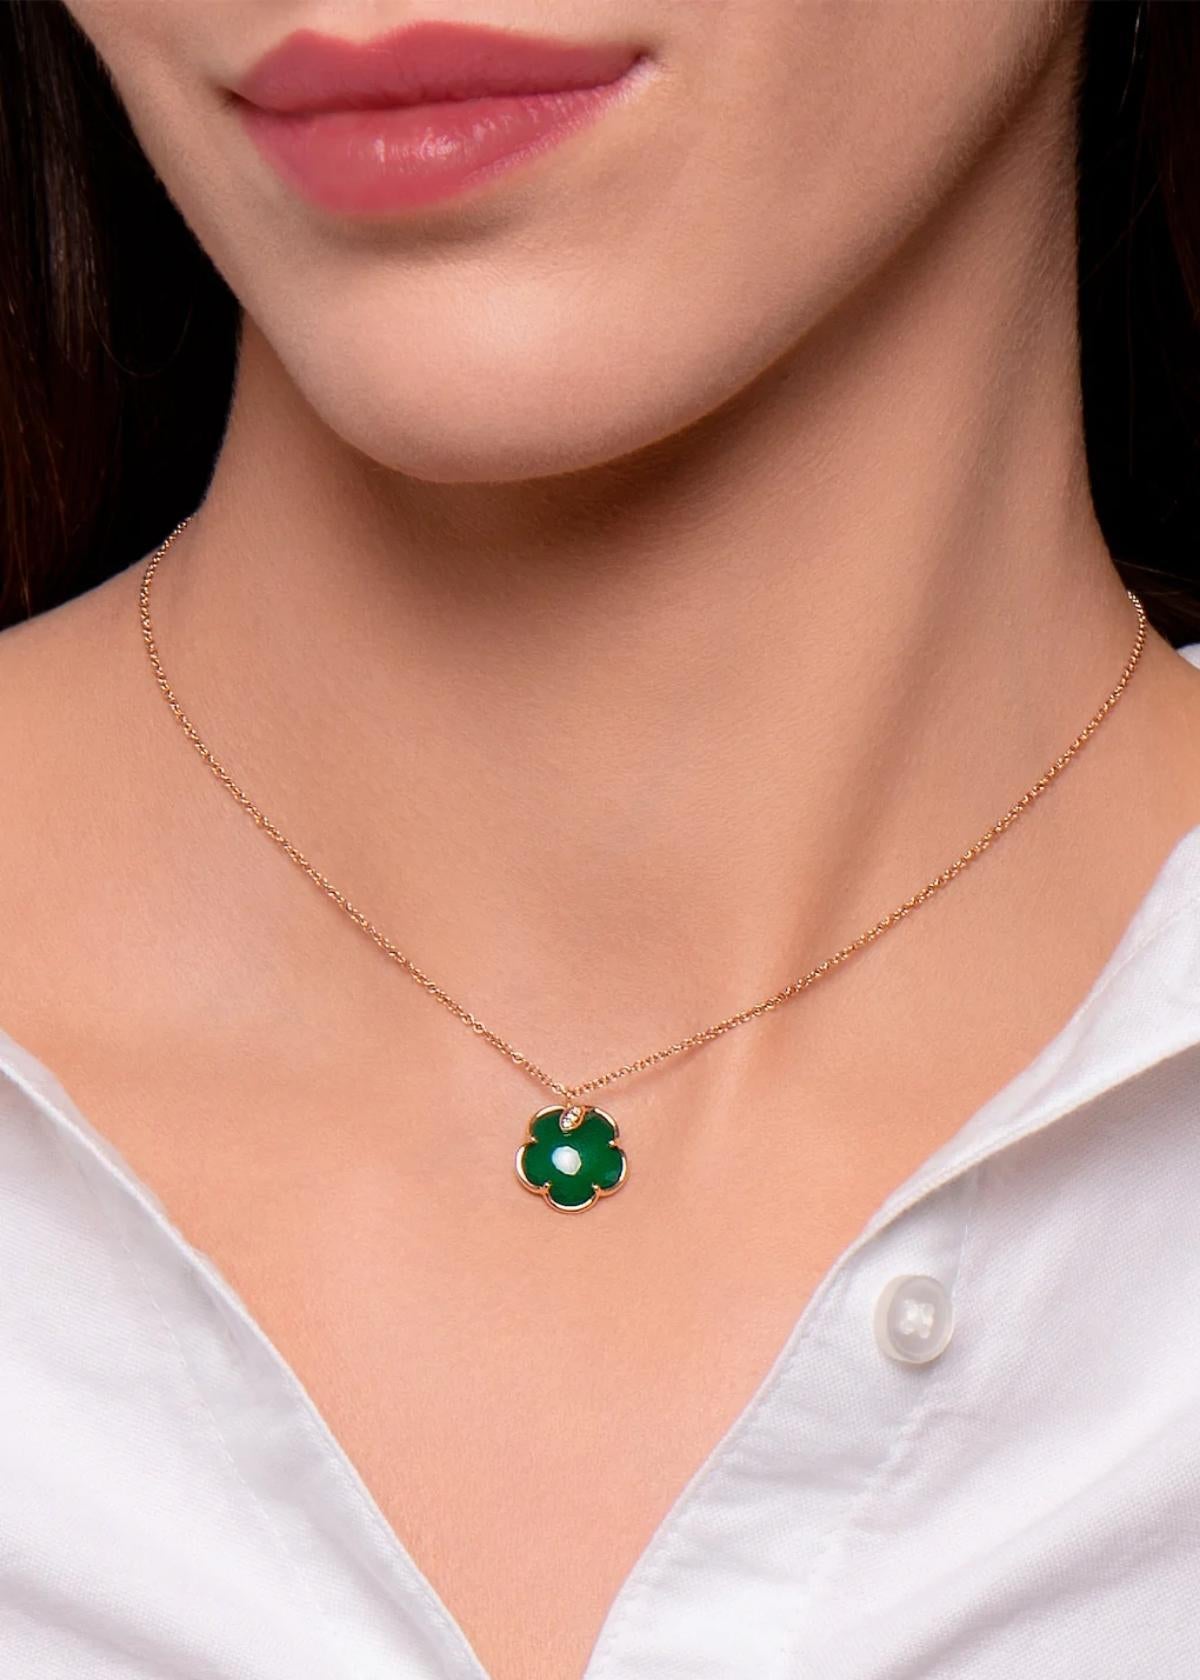 Petit Joli Necklace in 18k Rose Gold with Green Agate, White and Champagne Diamonds.

Petit Joli is a floral dream on your skin. The collection is designed for women always blooming in a free soul. This collection embodies the everlasting connection